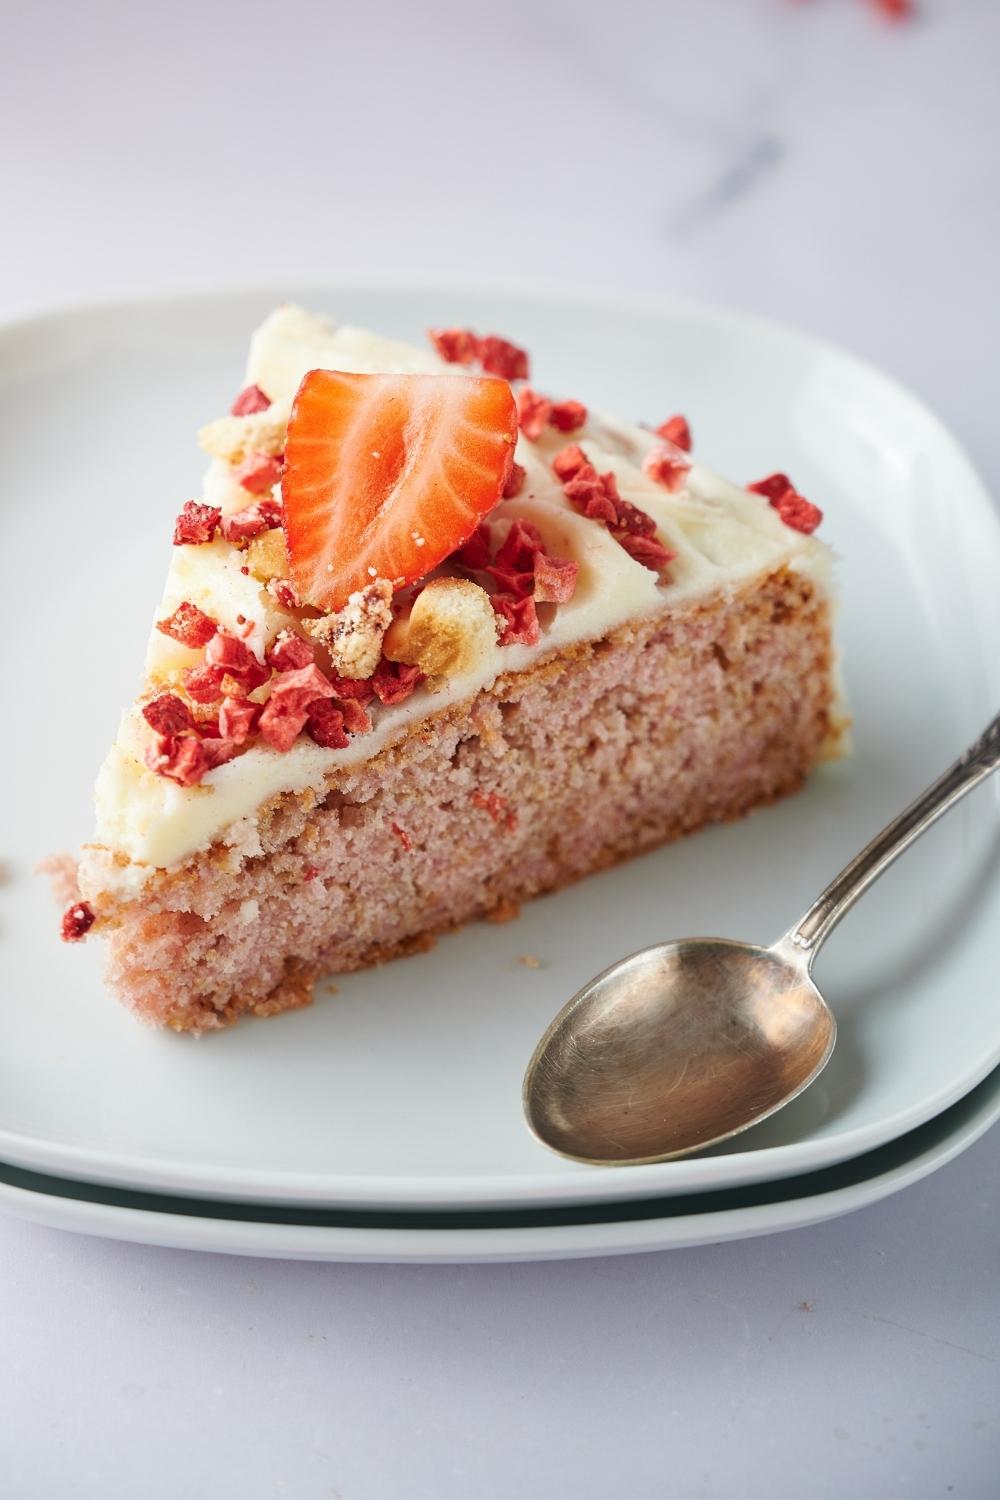 A slice of strawberry crunch cake toped with dried strawberry crumbles, frosting and a fresh strawberry slice on a plate. A spoon lays across the plate.